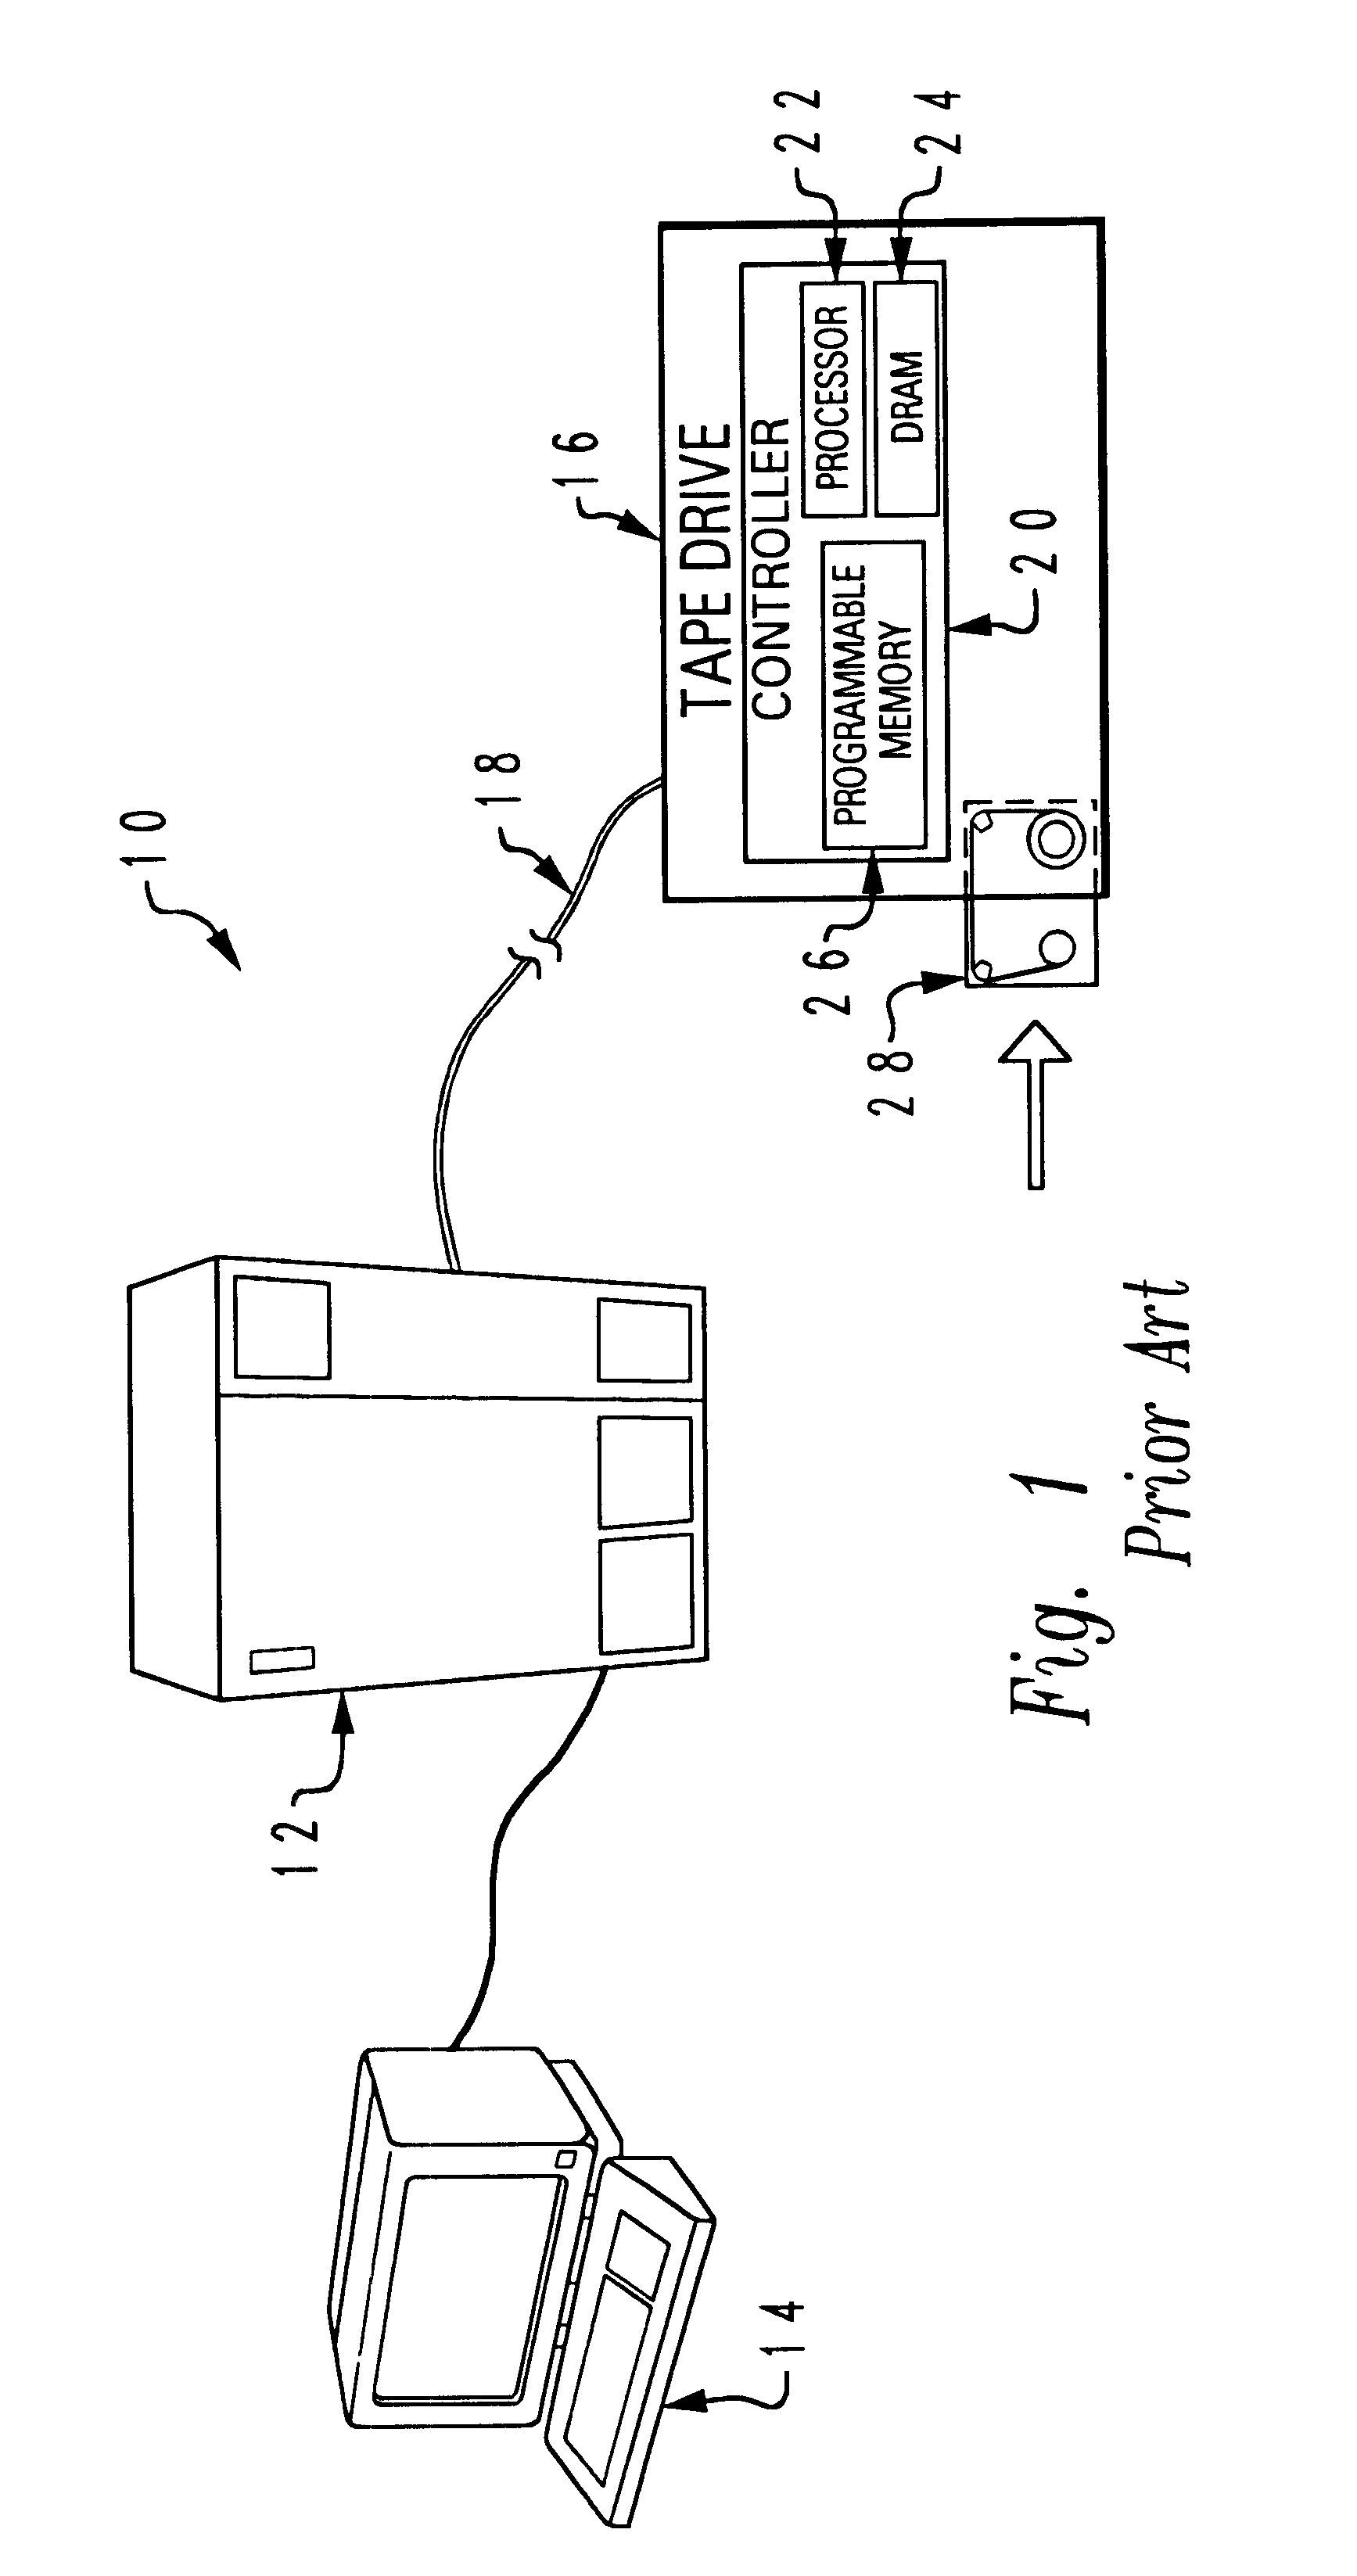 Method and system for reversible installation of software applications in a data processing system utilizing an automated archival process